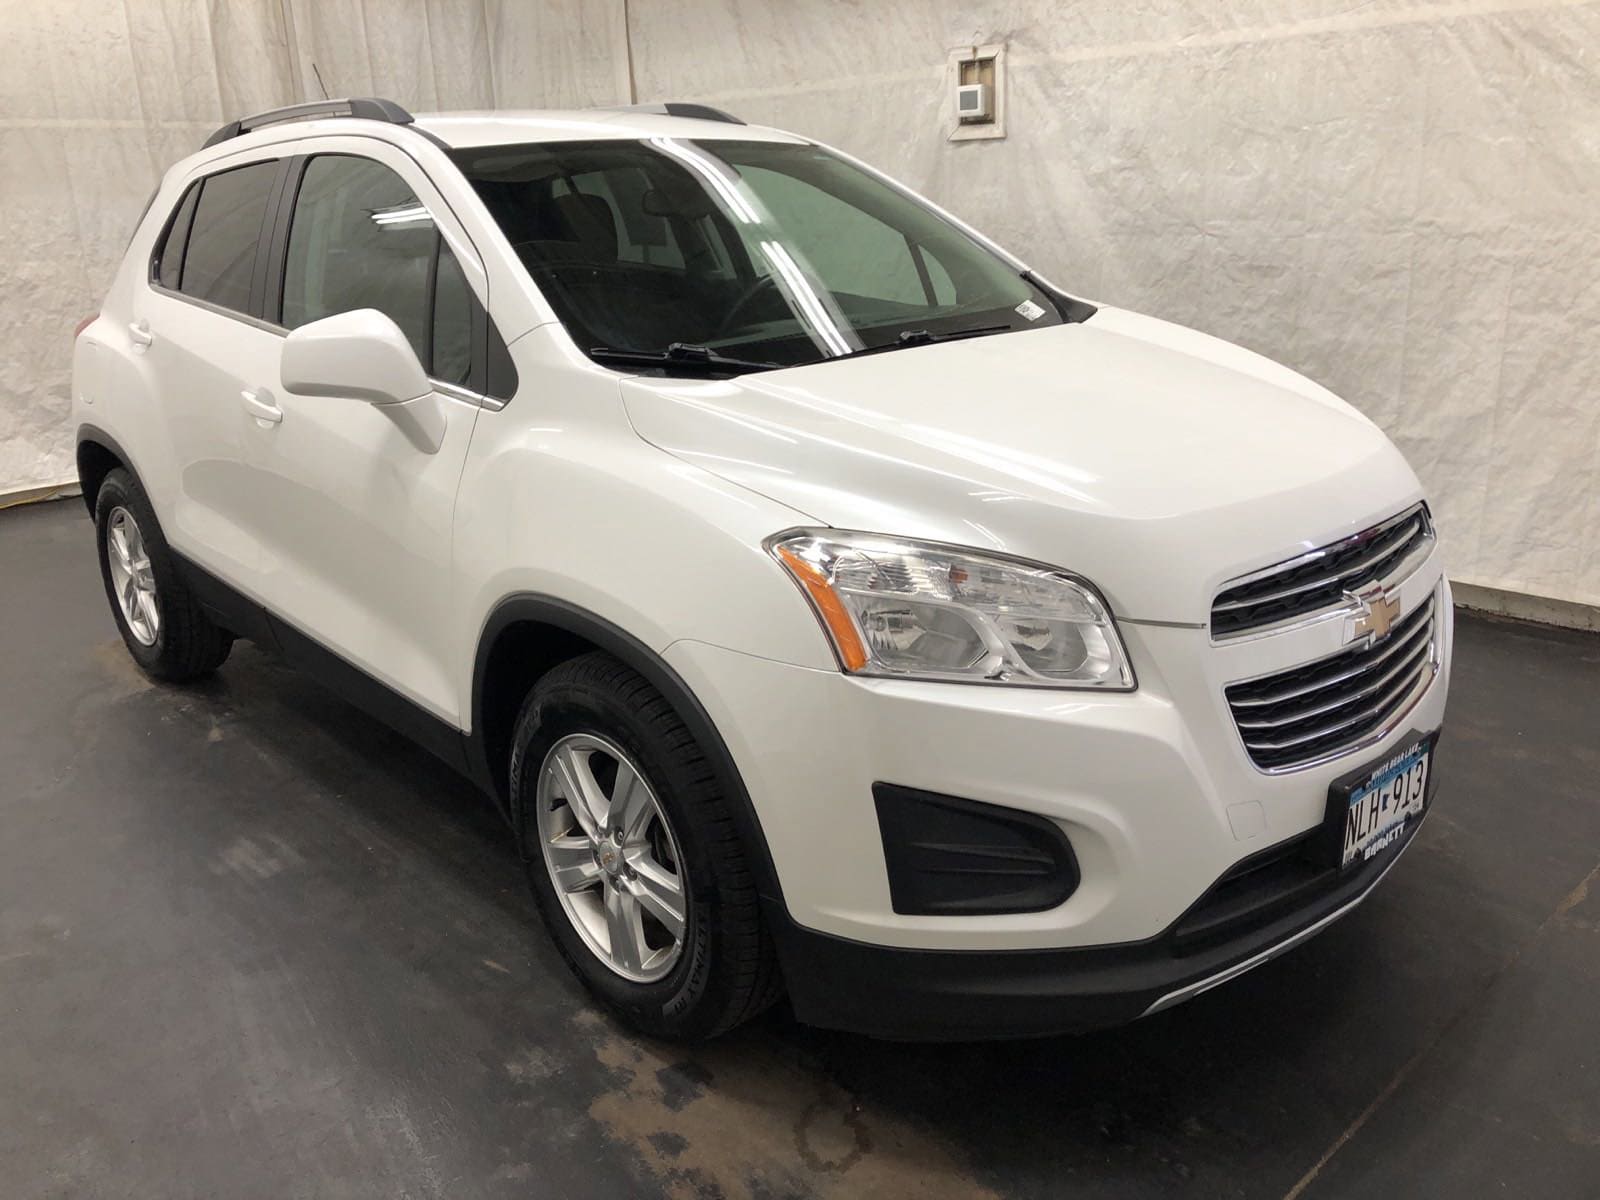 Used 2015 Chevrolet Trax LT with VIN KL7CJLSB0FB056136 for sale in White Bear Lake, Minnesota